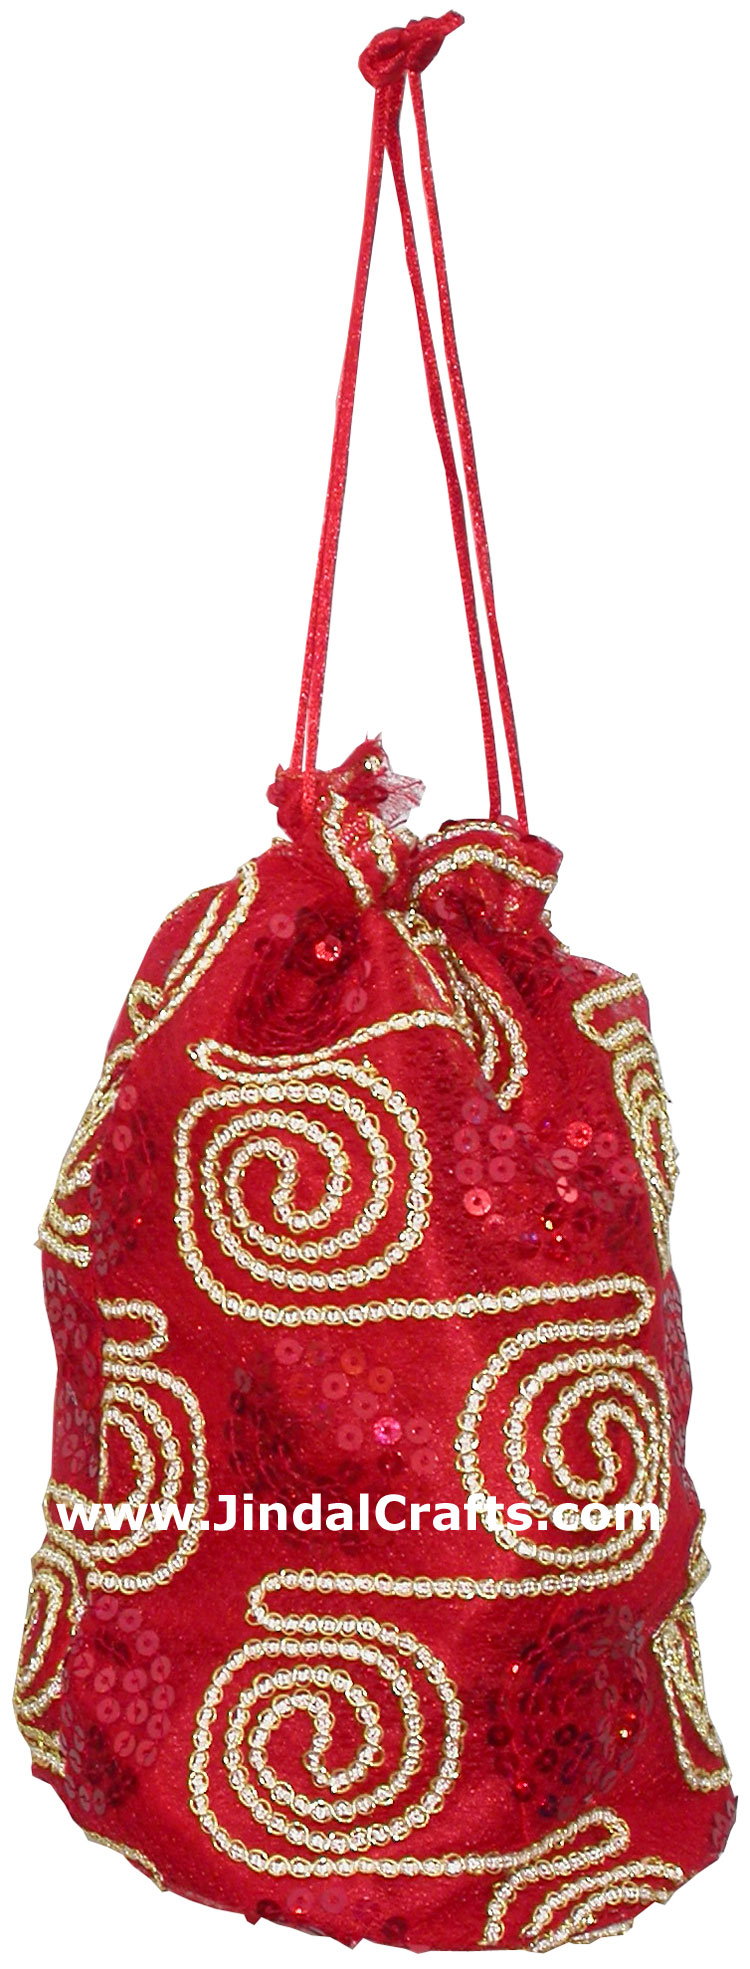 Designer Draw String Bags Hand Embroidered India Arts